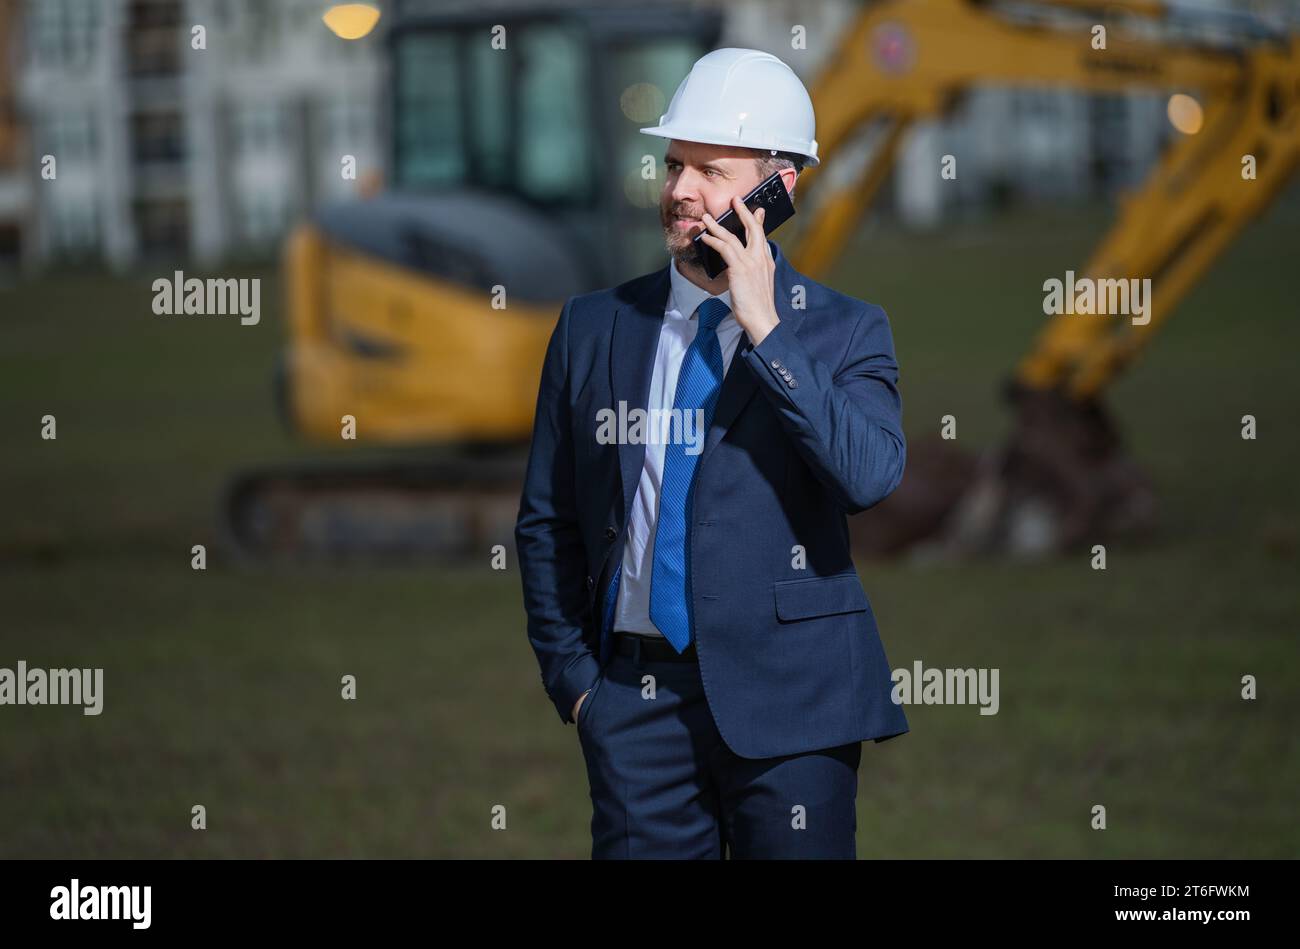 Construction manager in suit and helmet at a construction site. Construction manager worker or supervisor wearing hardhat in front of house. Superviso Stock Photo